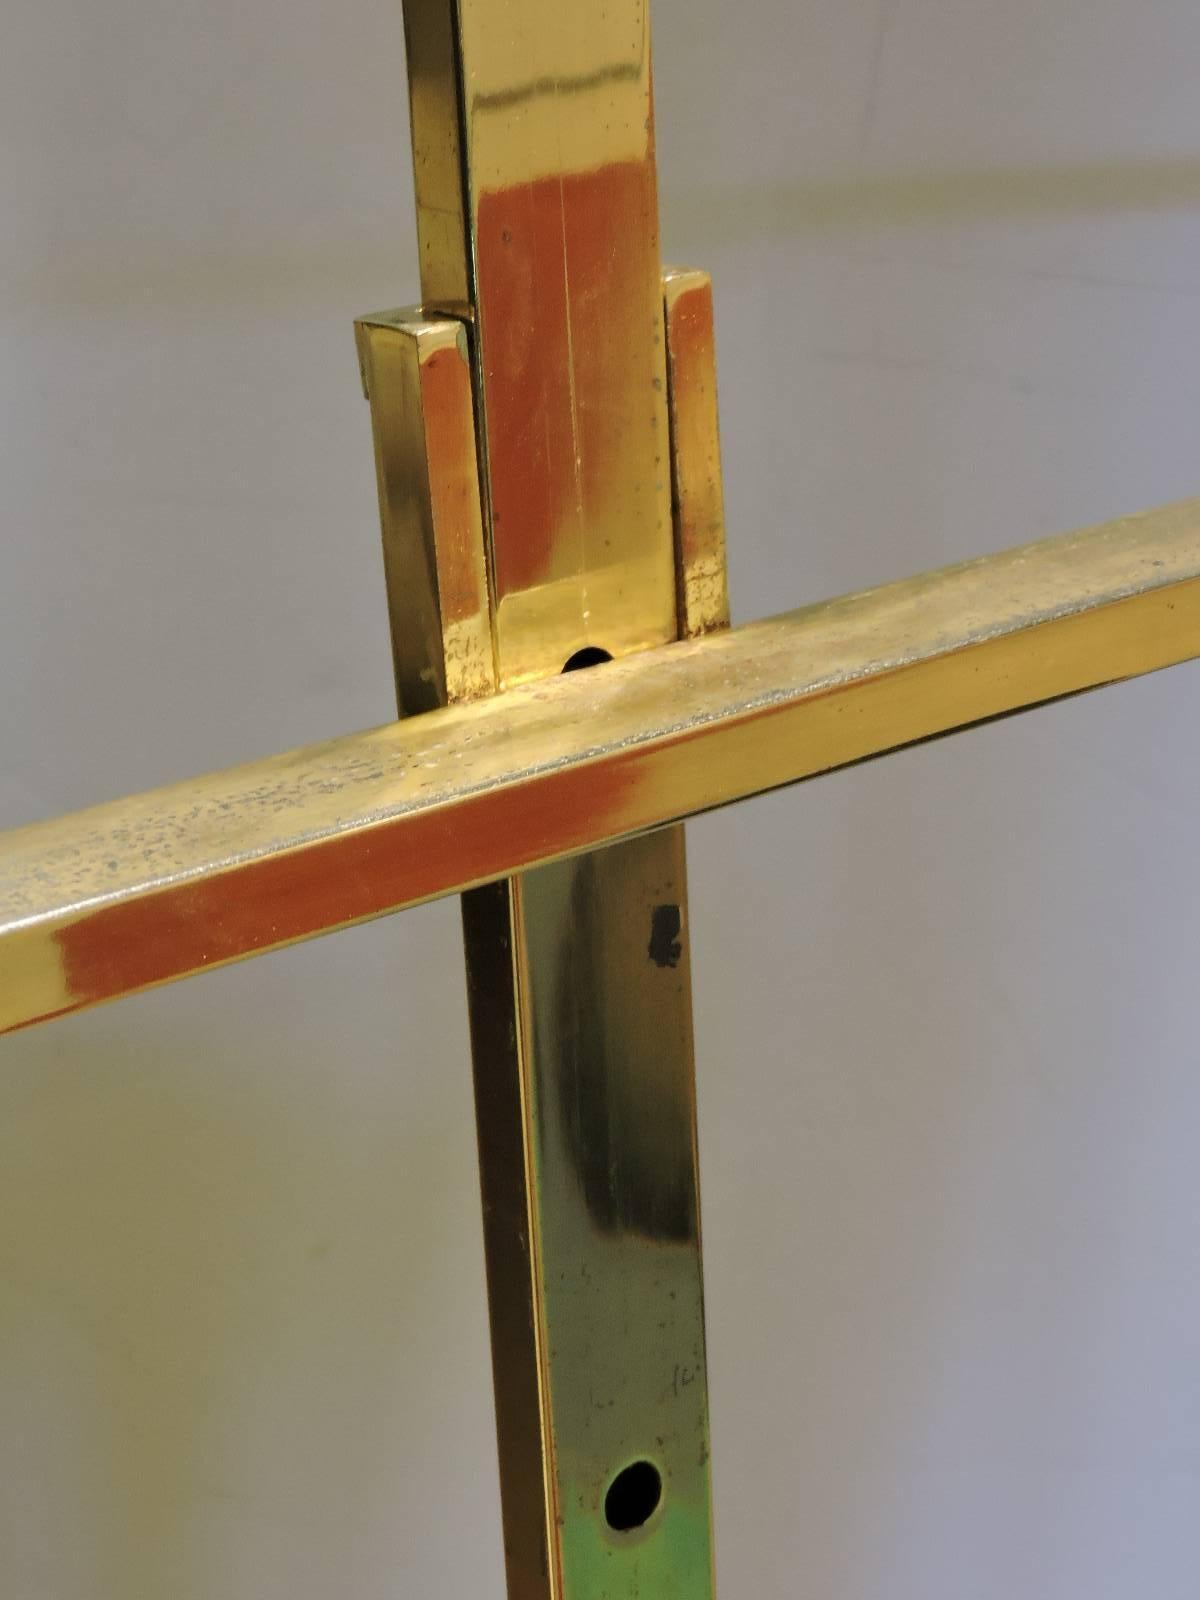 Adjustable brass floor easel by DIA - Design Institute of America - with a streamlined modernist form and four height settings for front shelf ( lowest is 26 inches - highest is 44 inches) DIA tag on underside of shelf - circa 1960-1970. See all